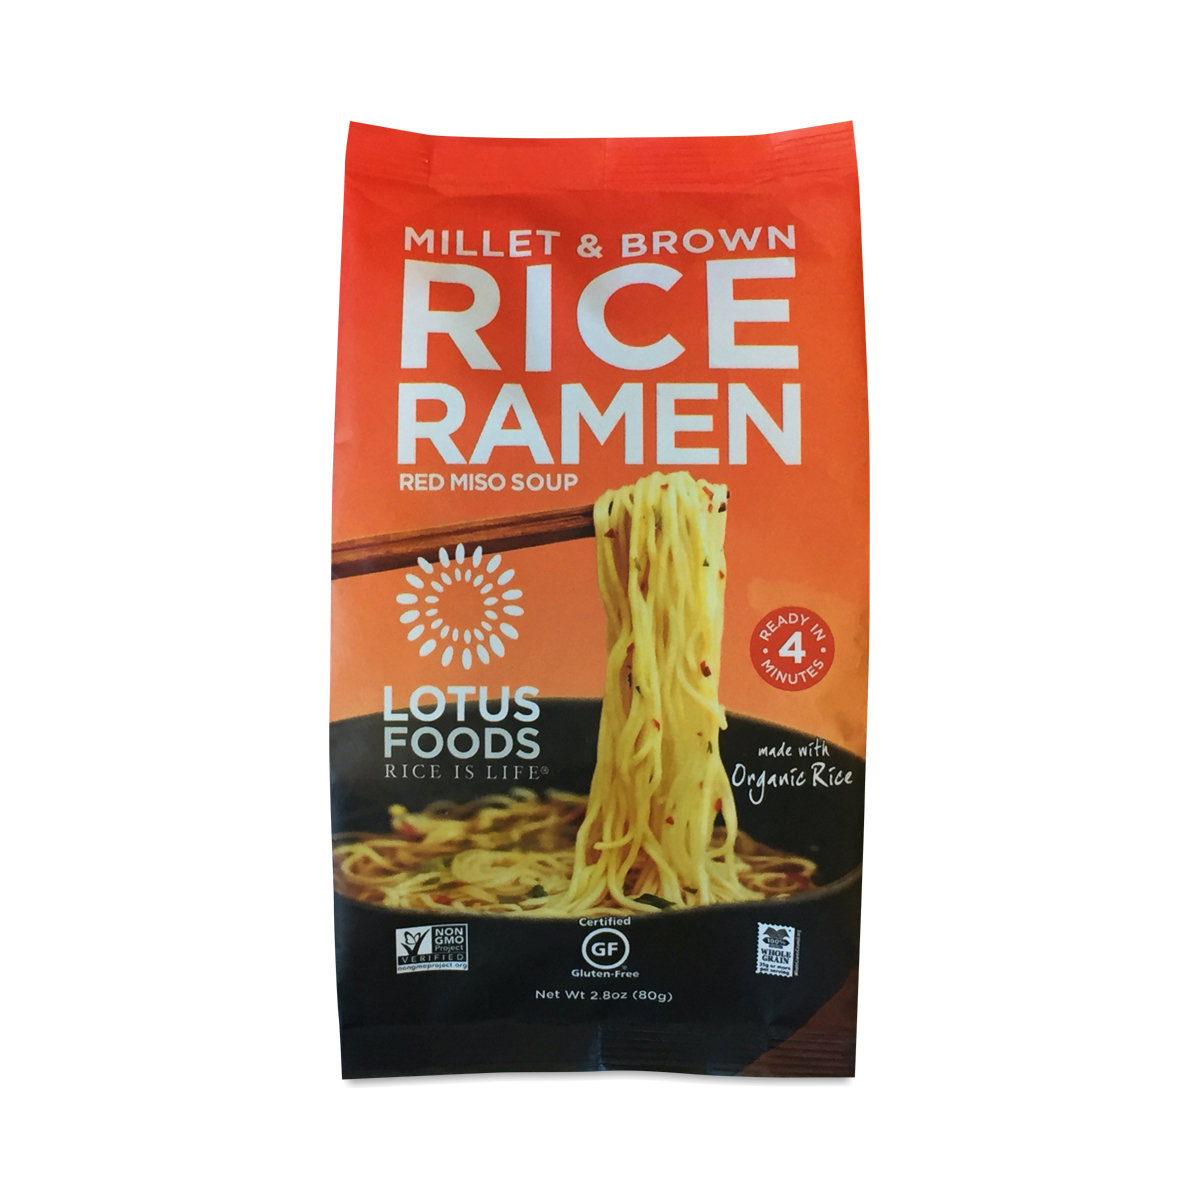 Lotus Foods Gluten-Free Millet & Brown Rice Ramen with Miso Soup 2.8 oz container